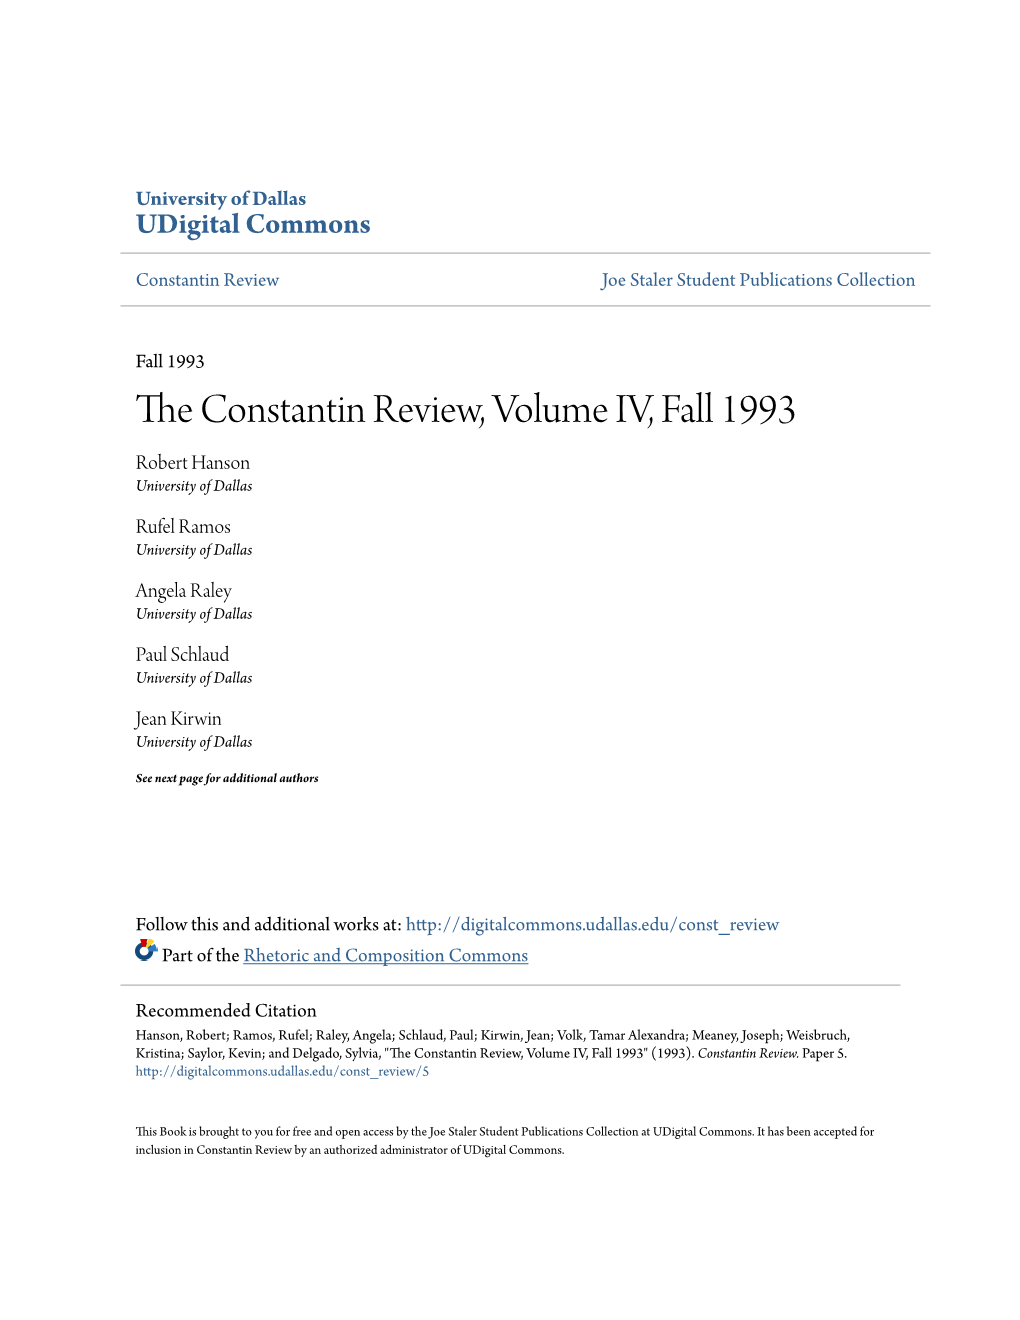 The Constantin Review, Volume IV, Fall 1993